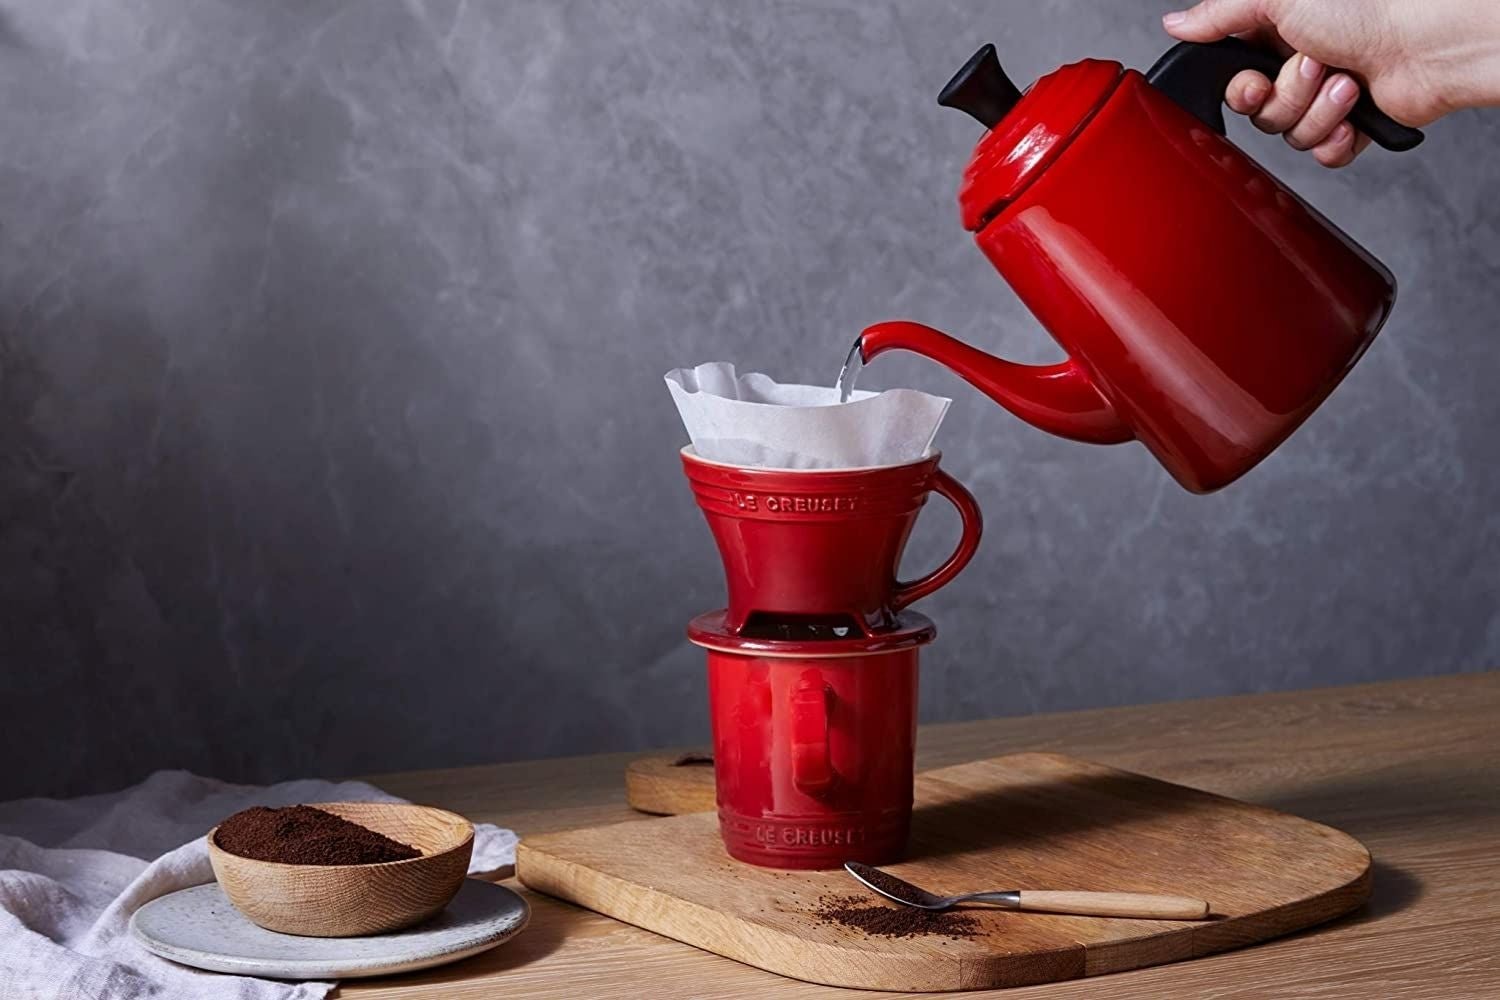 The 31 Best Gifts for Coffee Lovers